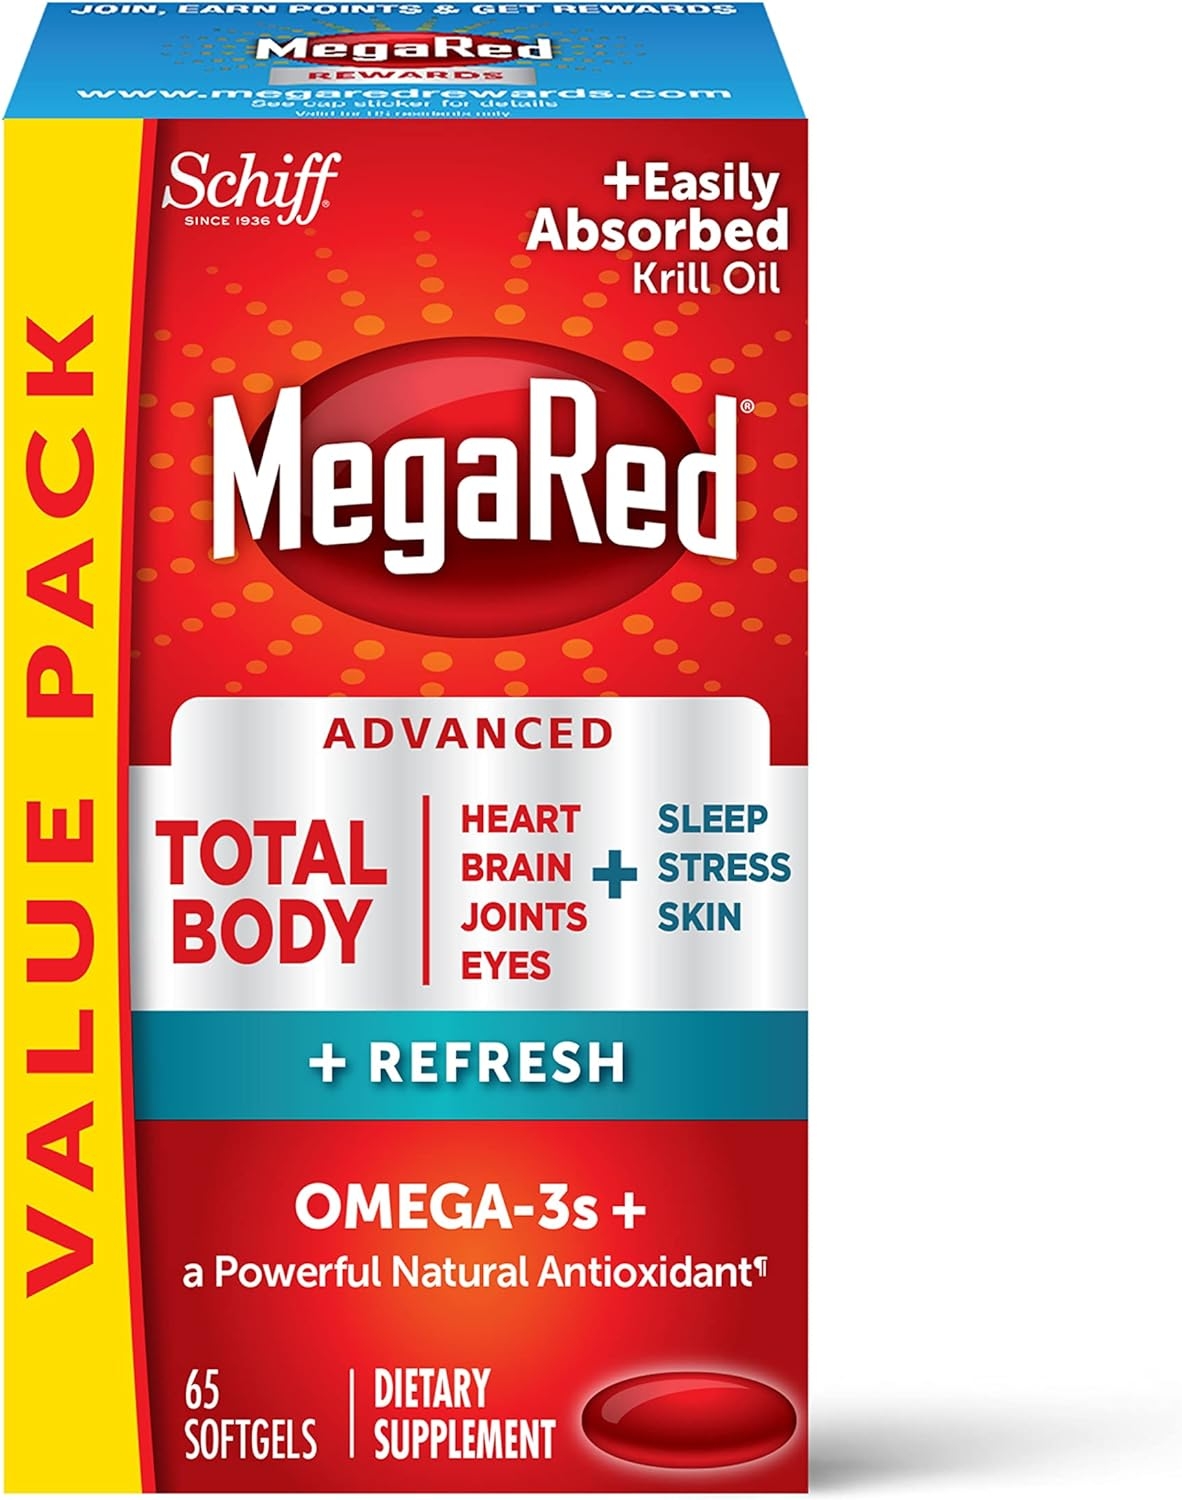 Omega-3 Blend Total Body + Refresh 500mg Softgels, MegaRed (65 count in a bottle), Easily Absorbed Krill Oil, To Support Your Heart, Joints, Brain & Eyes